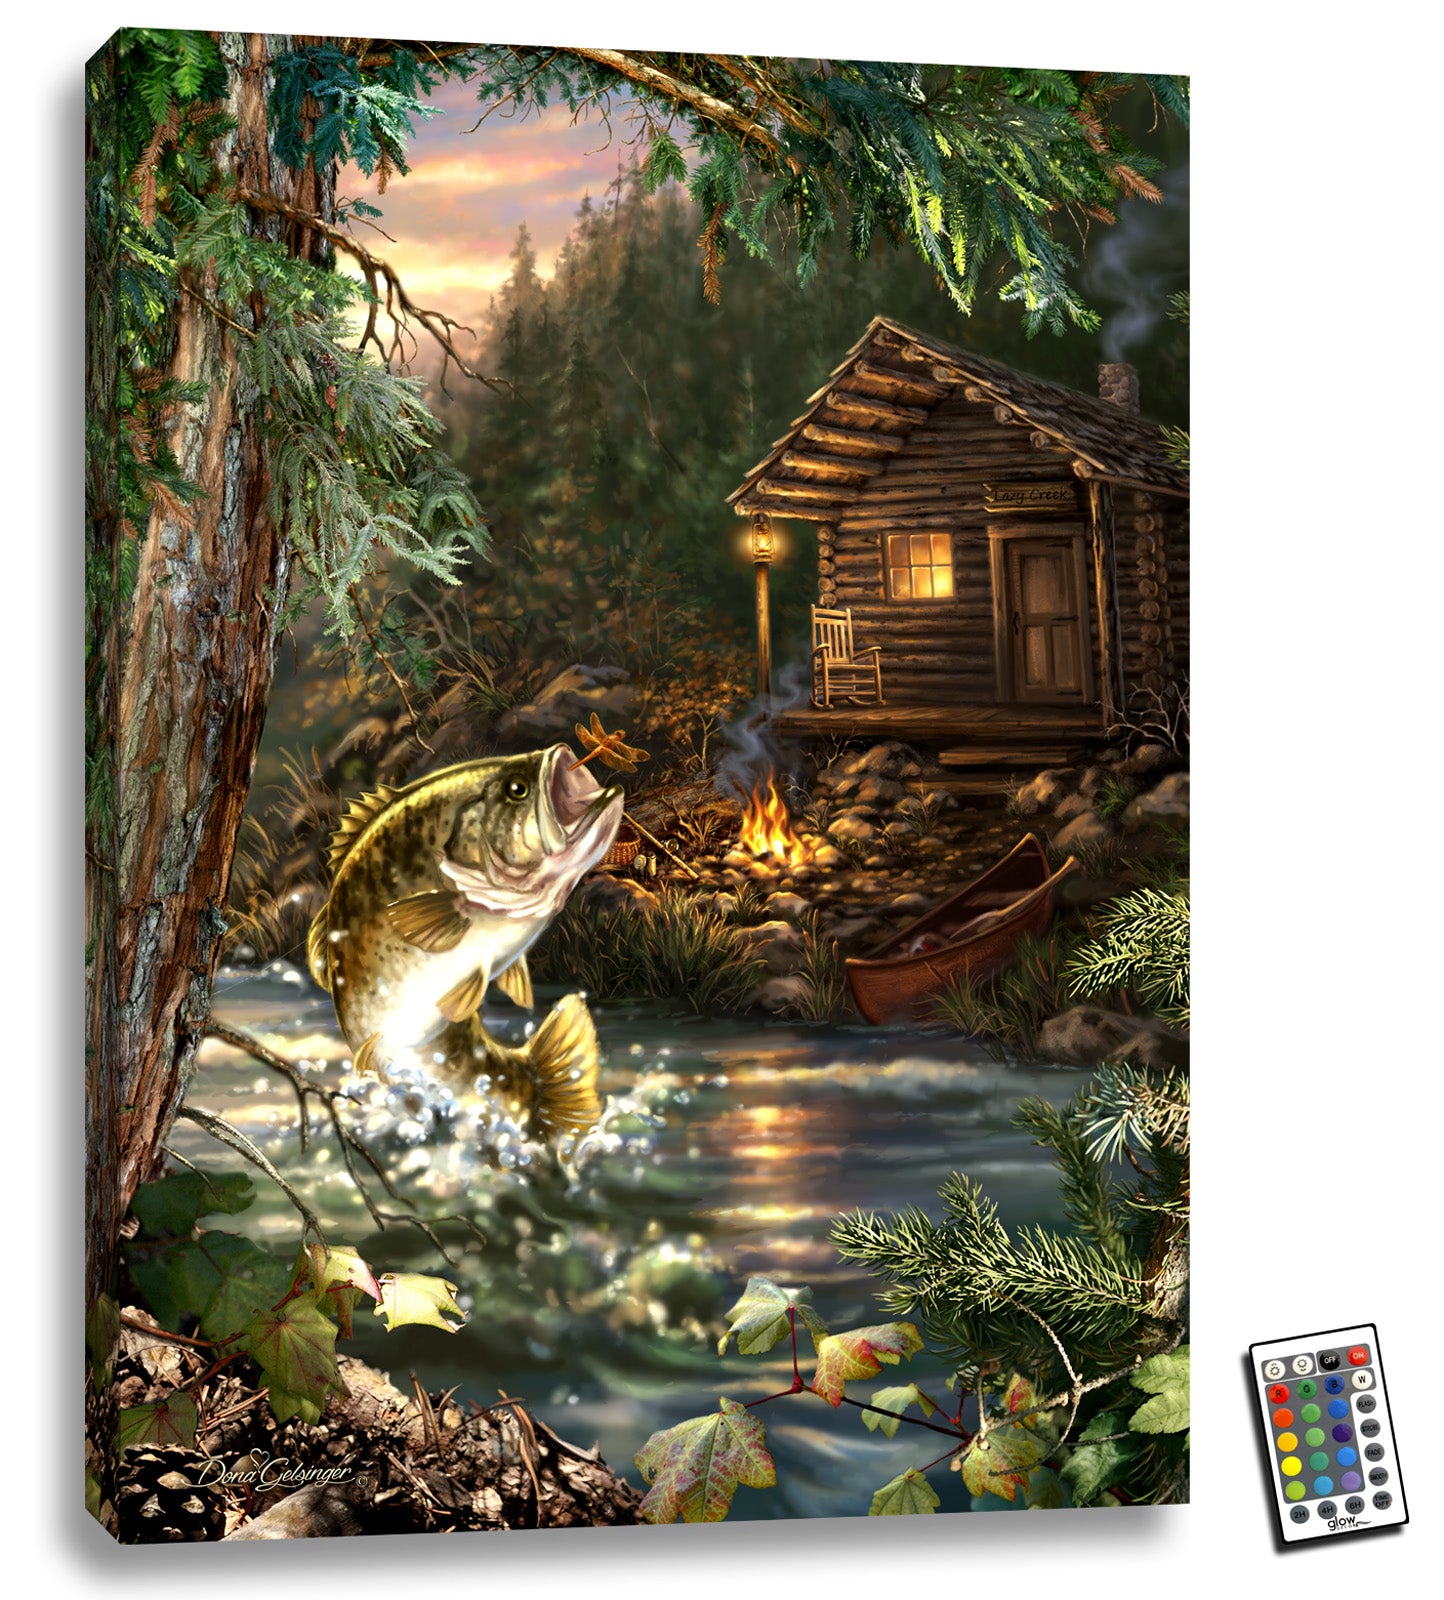 This stunning piece of art depicts a breathtaking moment where a fish leaps out of the water in pursuit of a dragonfly, creating a truly captivating image.  The peaceful and rustic cabin just off the bank adds a touch of tranquility to the scene, reminding us of the simple pleasures of life. The warm glow of the campfire in front of the cabin evokes a sense of coziness and invites us to sit back and relax, taking in the beauty of nature.